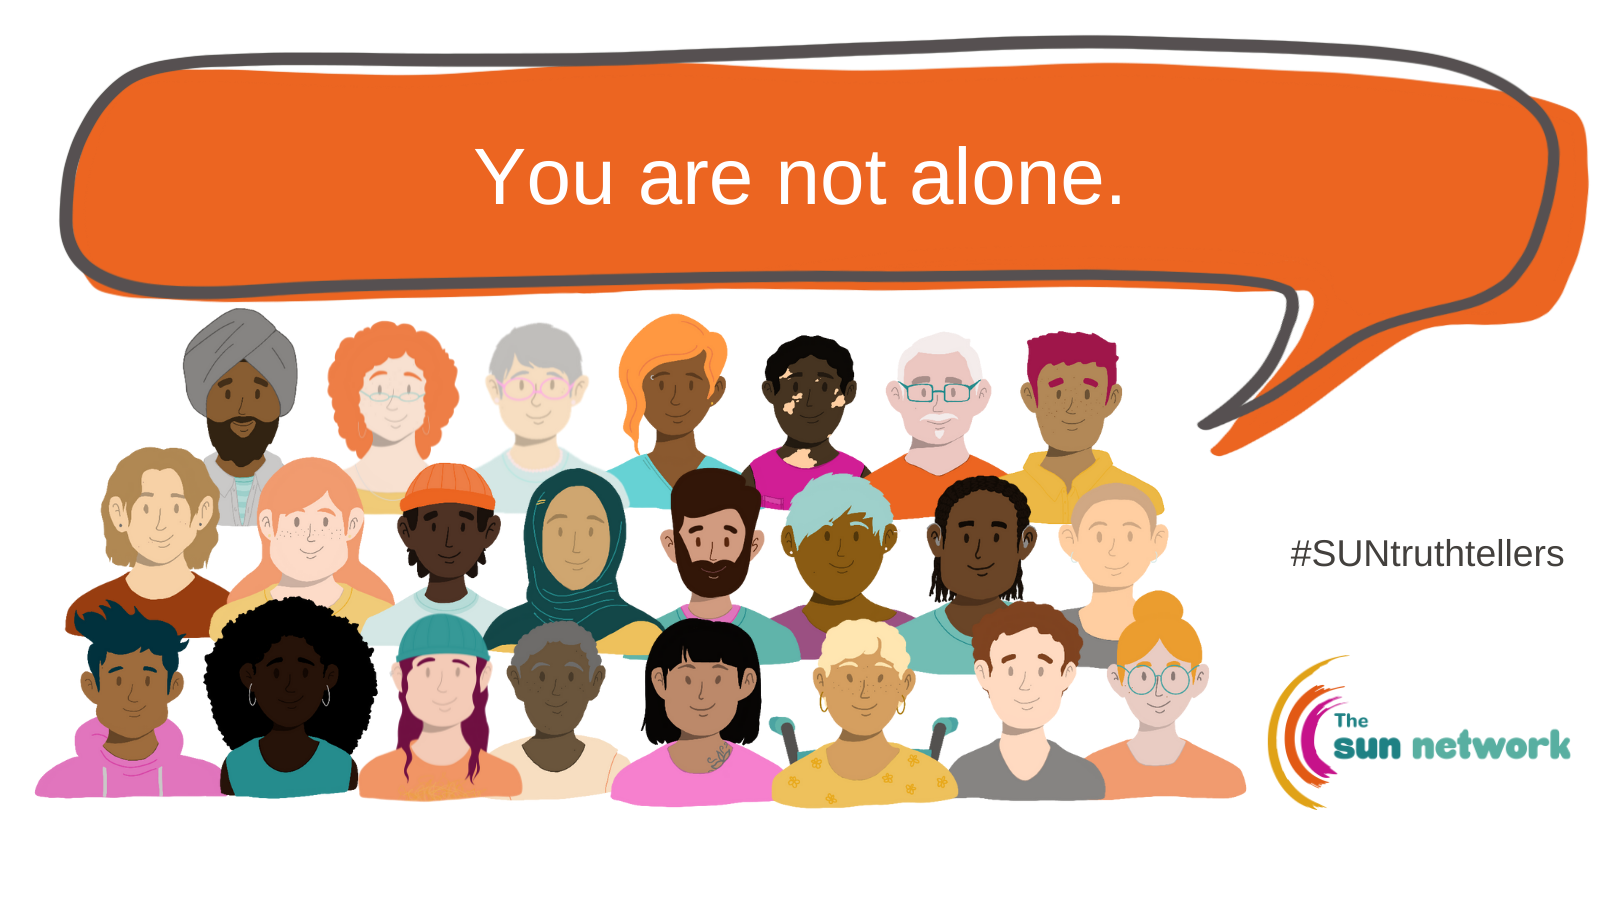 Eating Disorders Group Image with a speech bubble saying \'You are not alone\'.